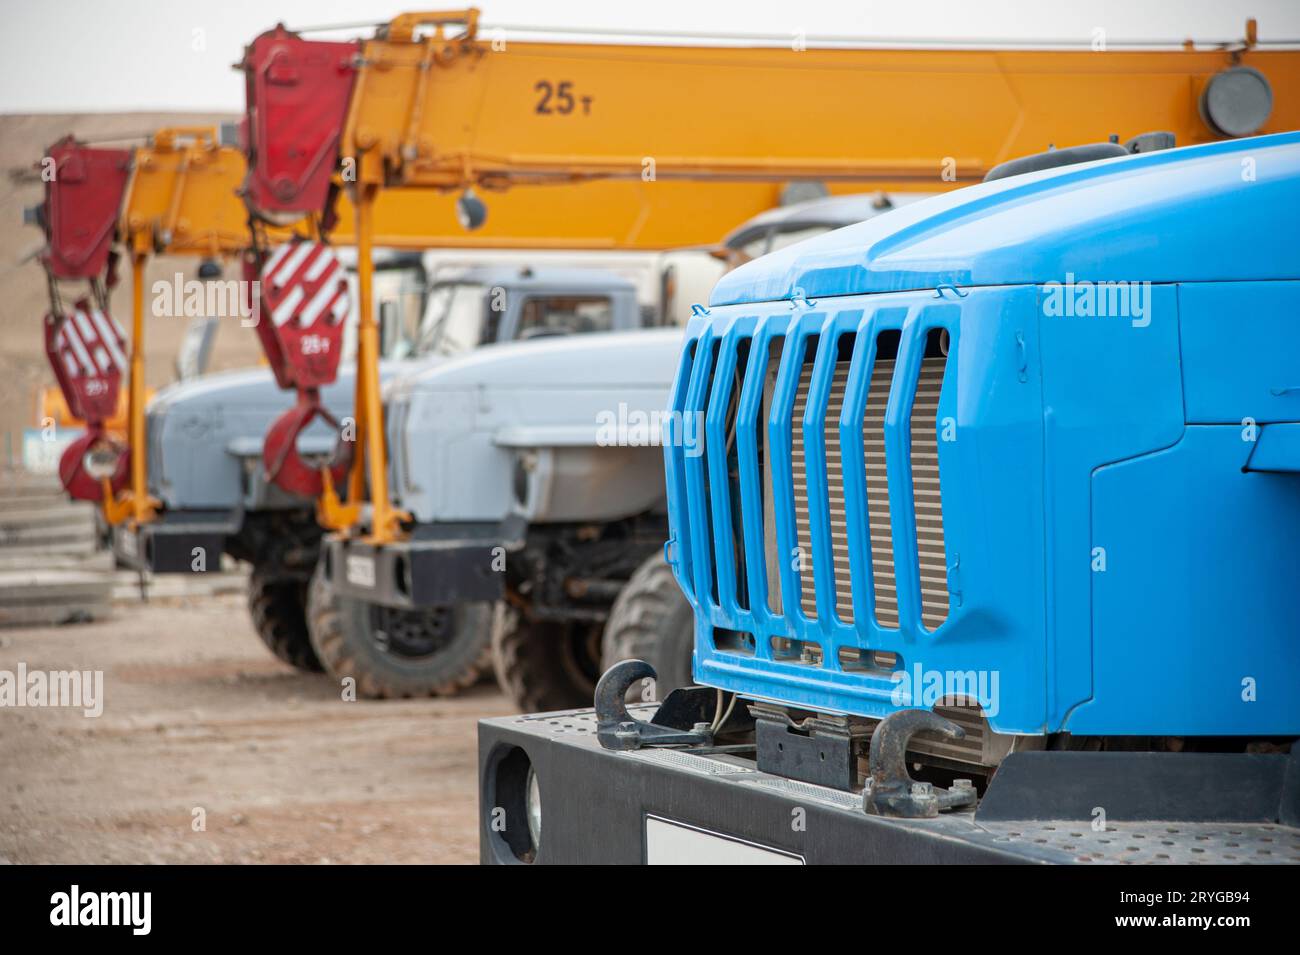 A closeup row of large truck cranes and machines at an industrial construction site Stock Photo